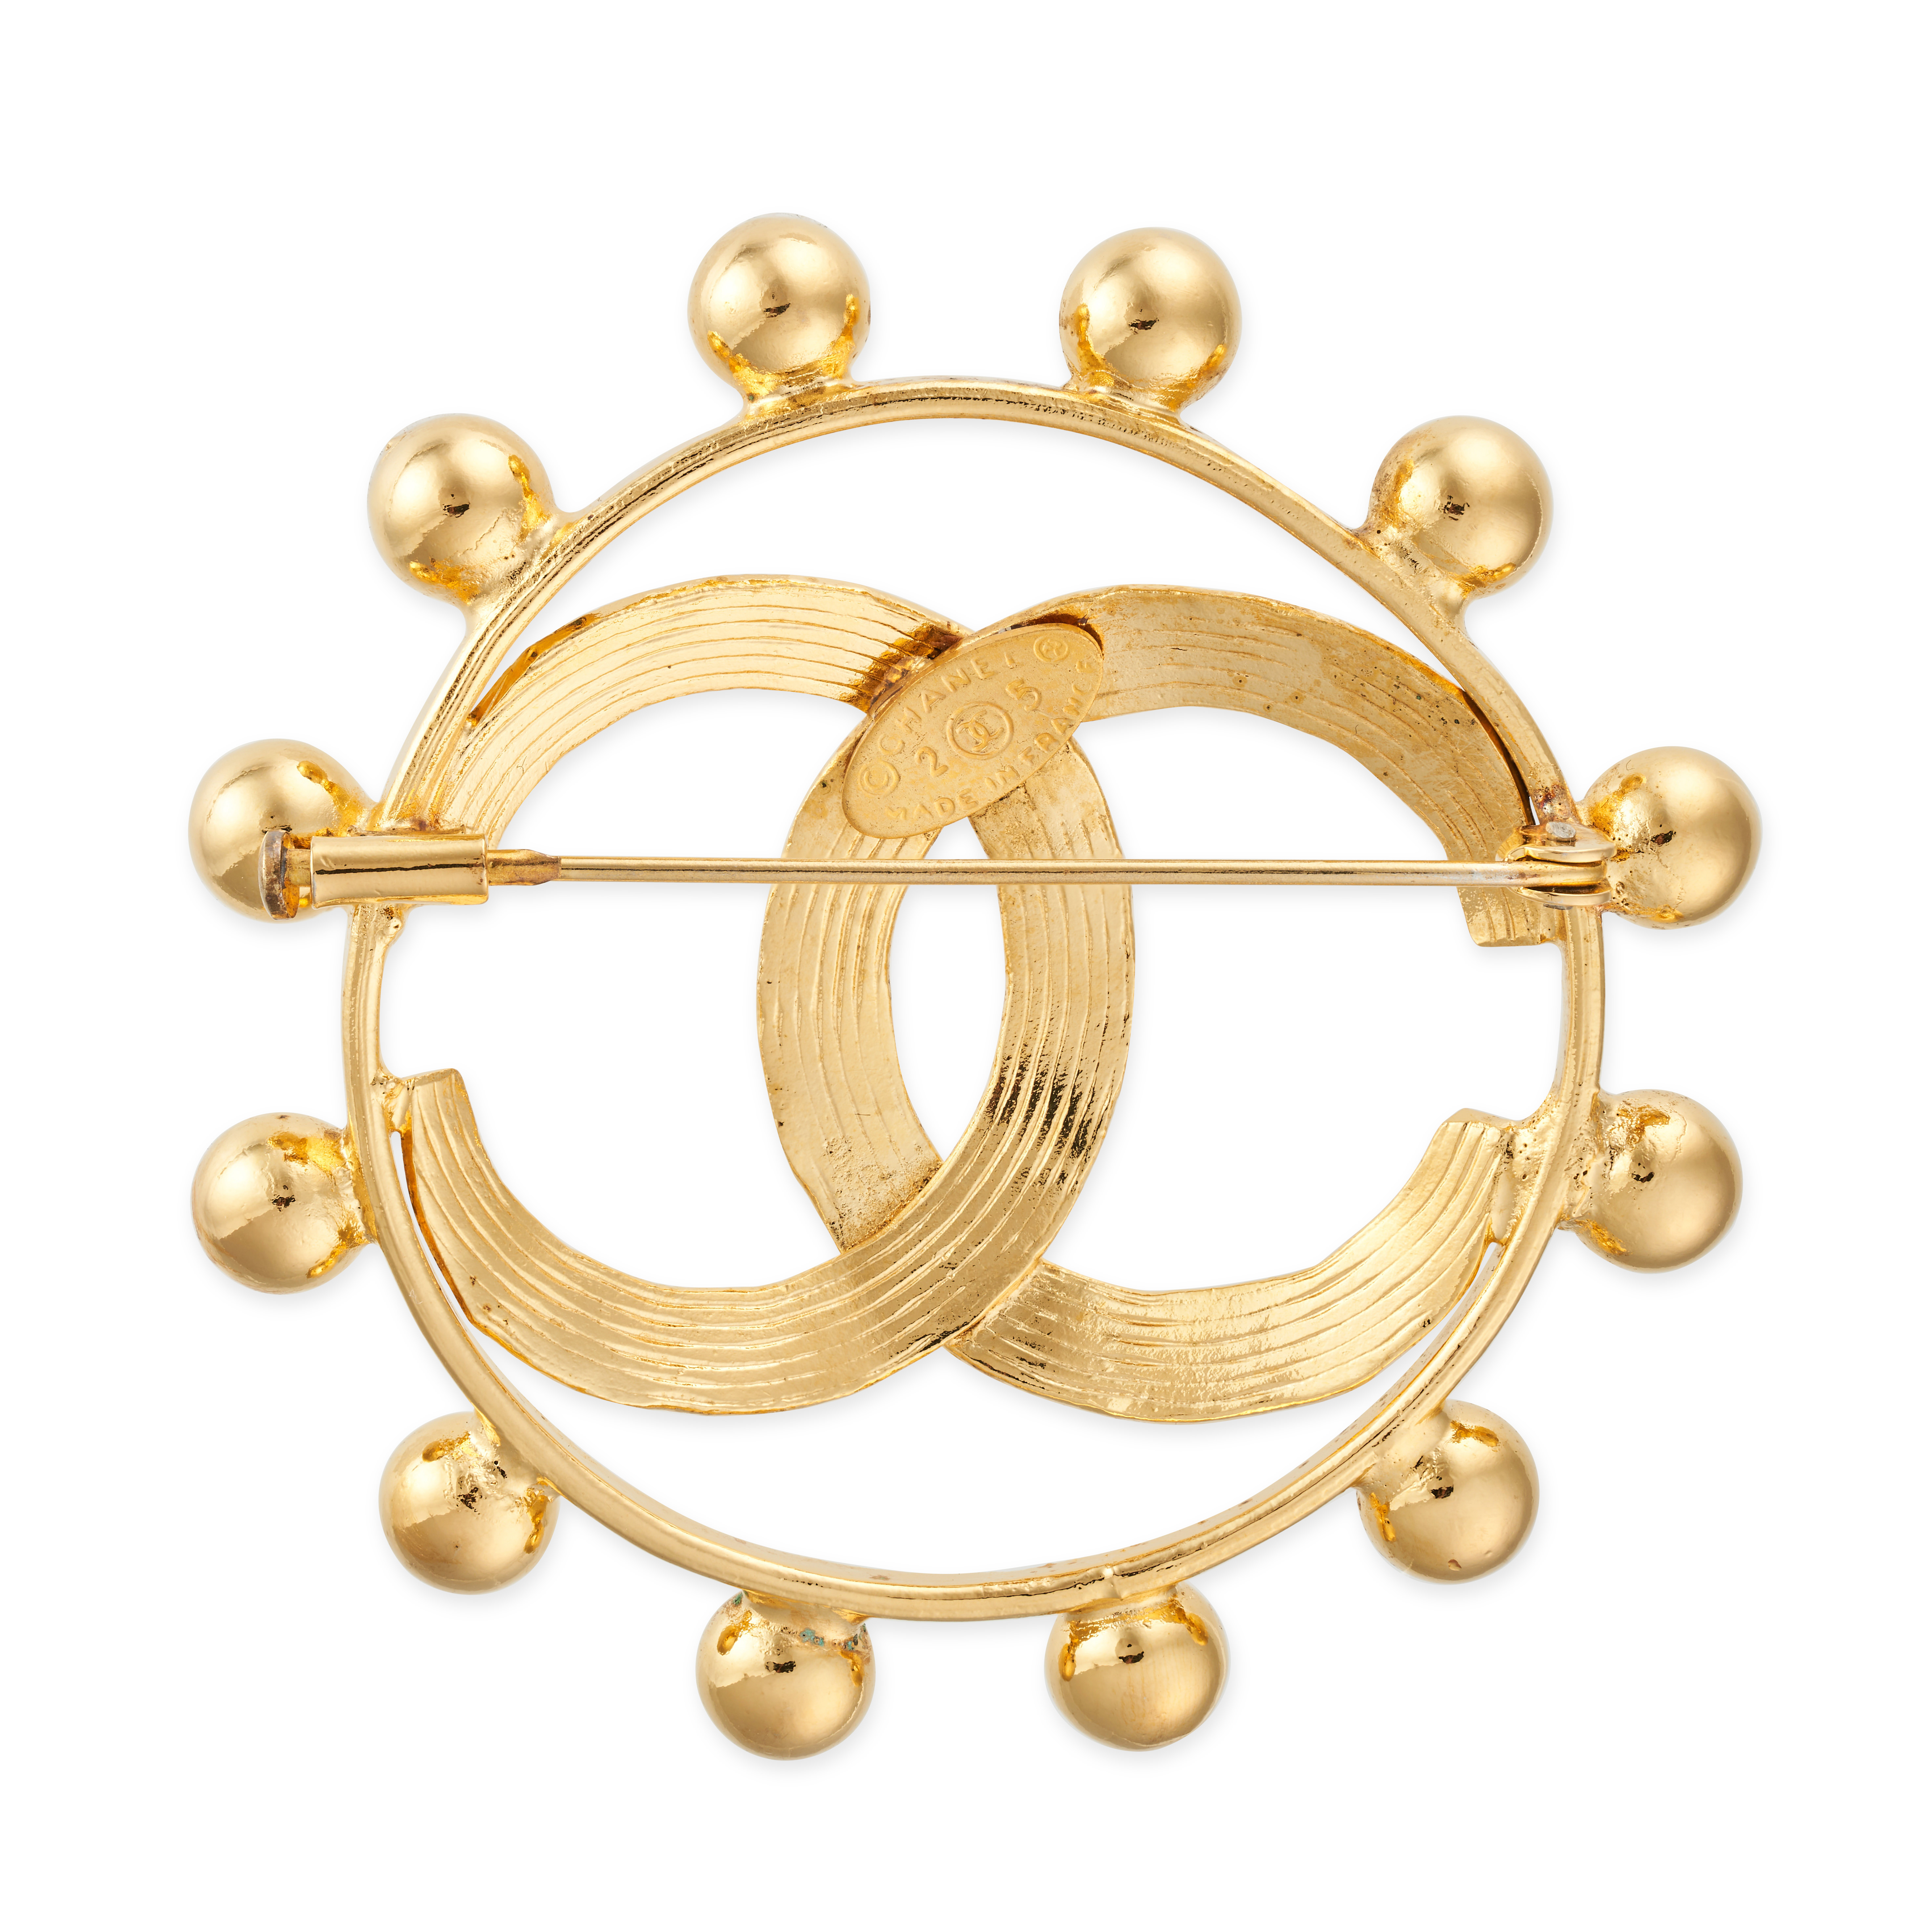 CHANEL, A LARGE CC BROOCH comprising an interlocking CC motif within a circle set with gold tone ... - Image 2 of 2